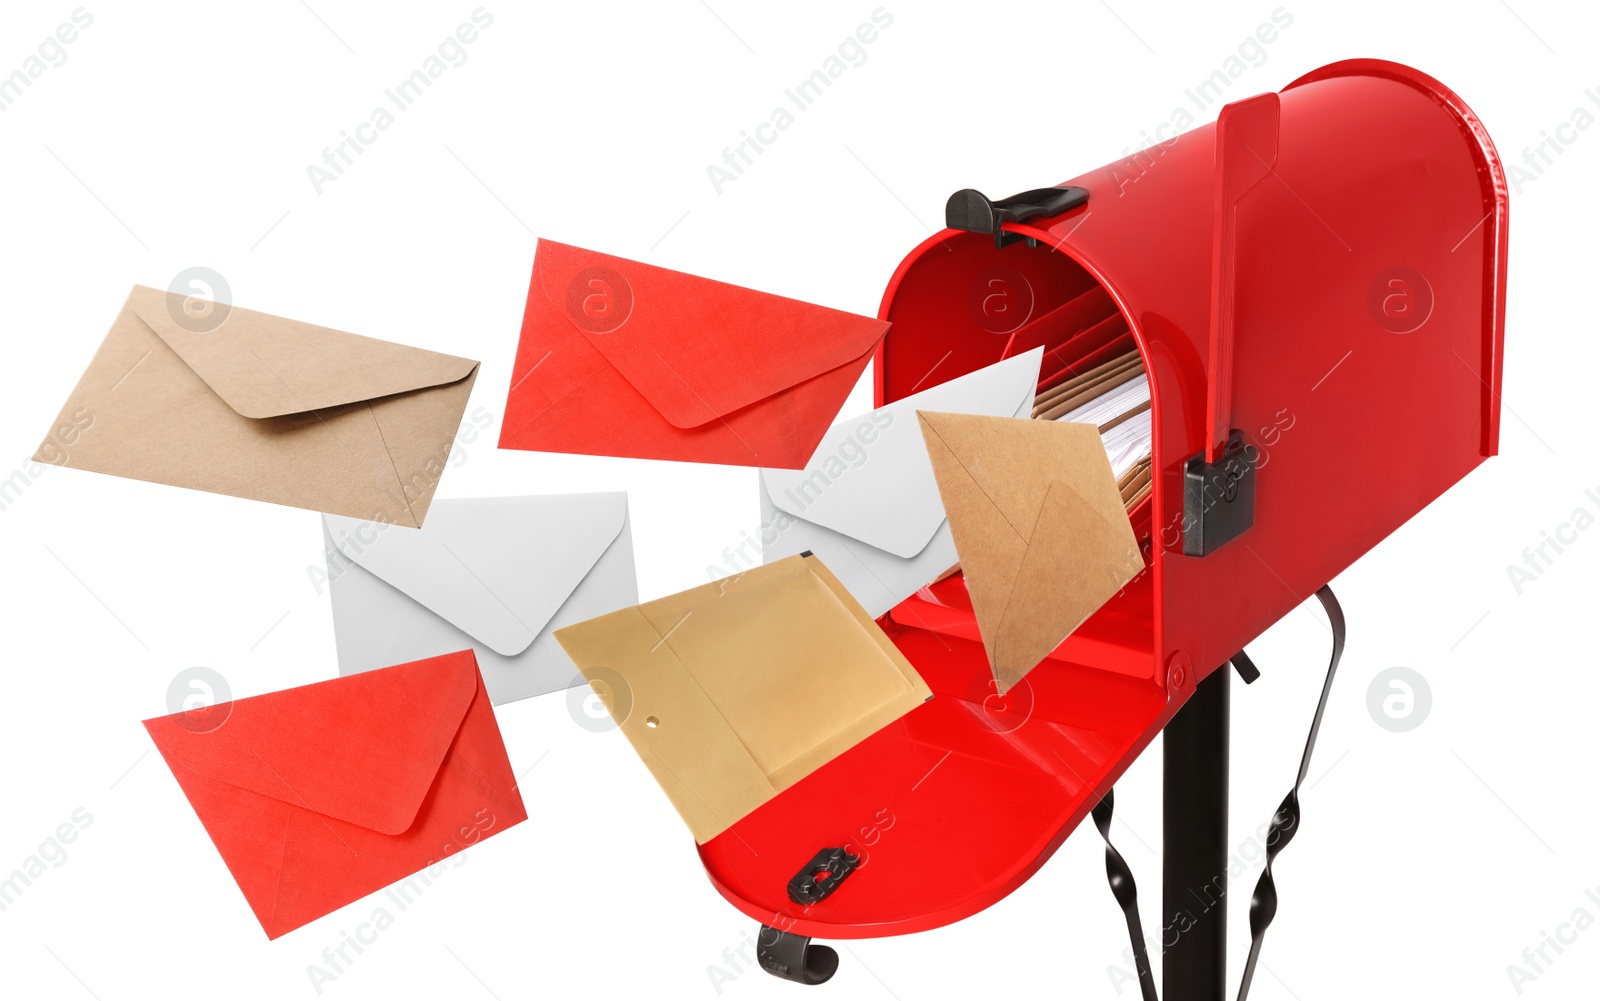 Image of Different color envelopes flying out from red letter box on white background